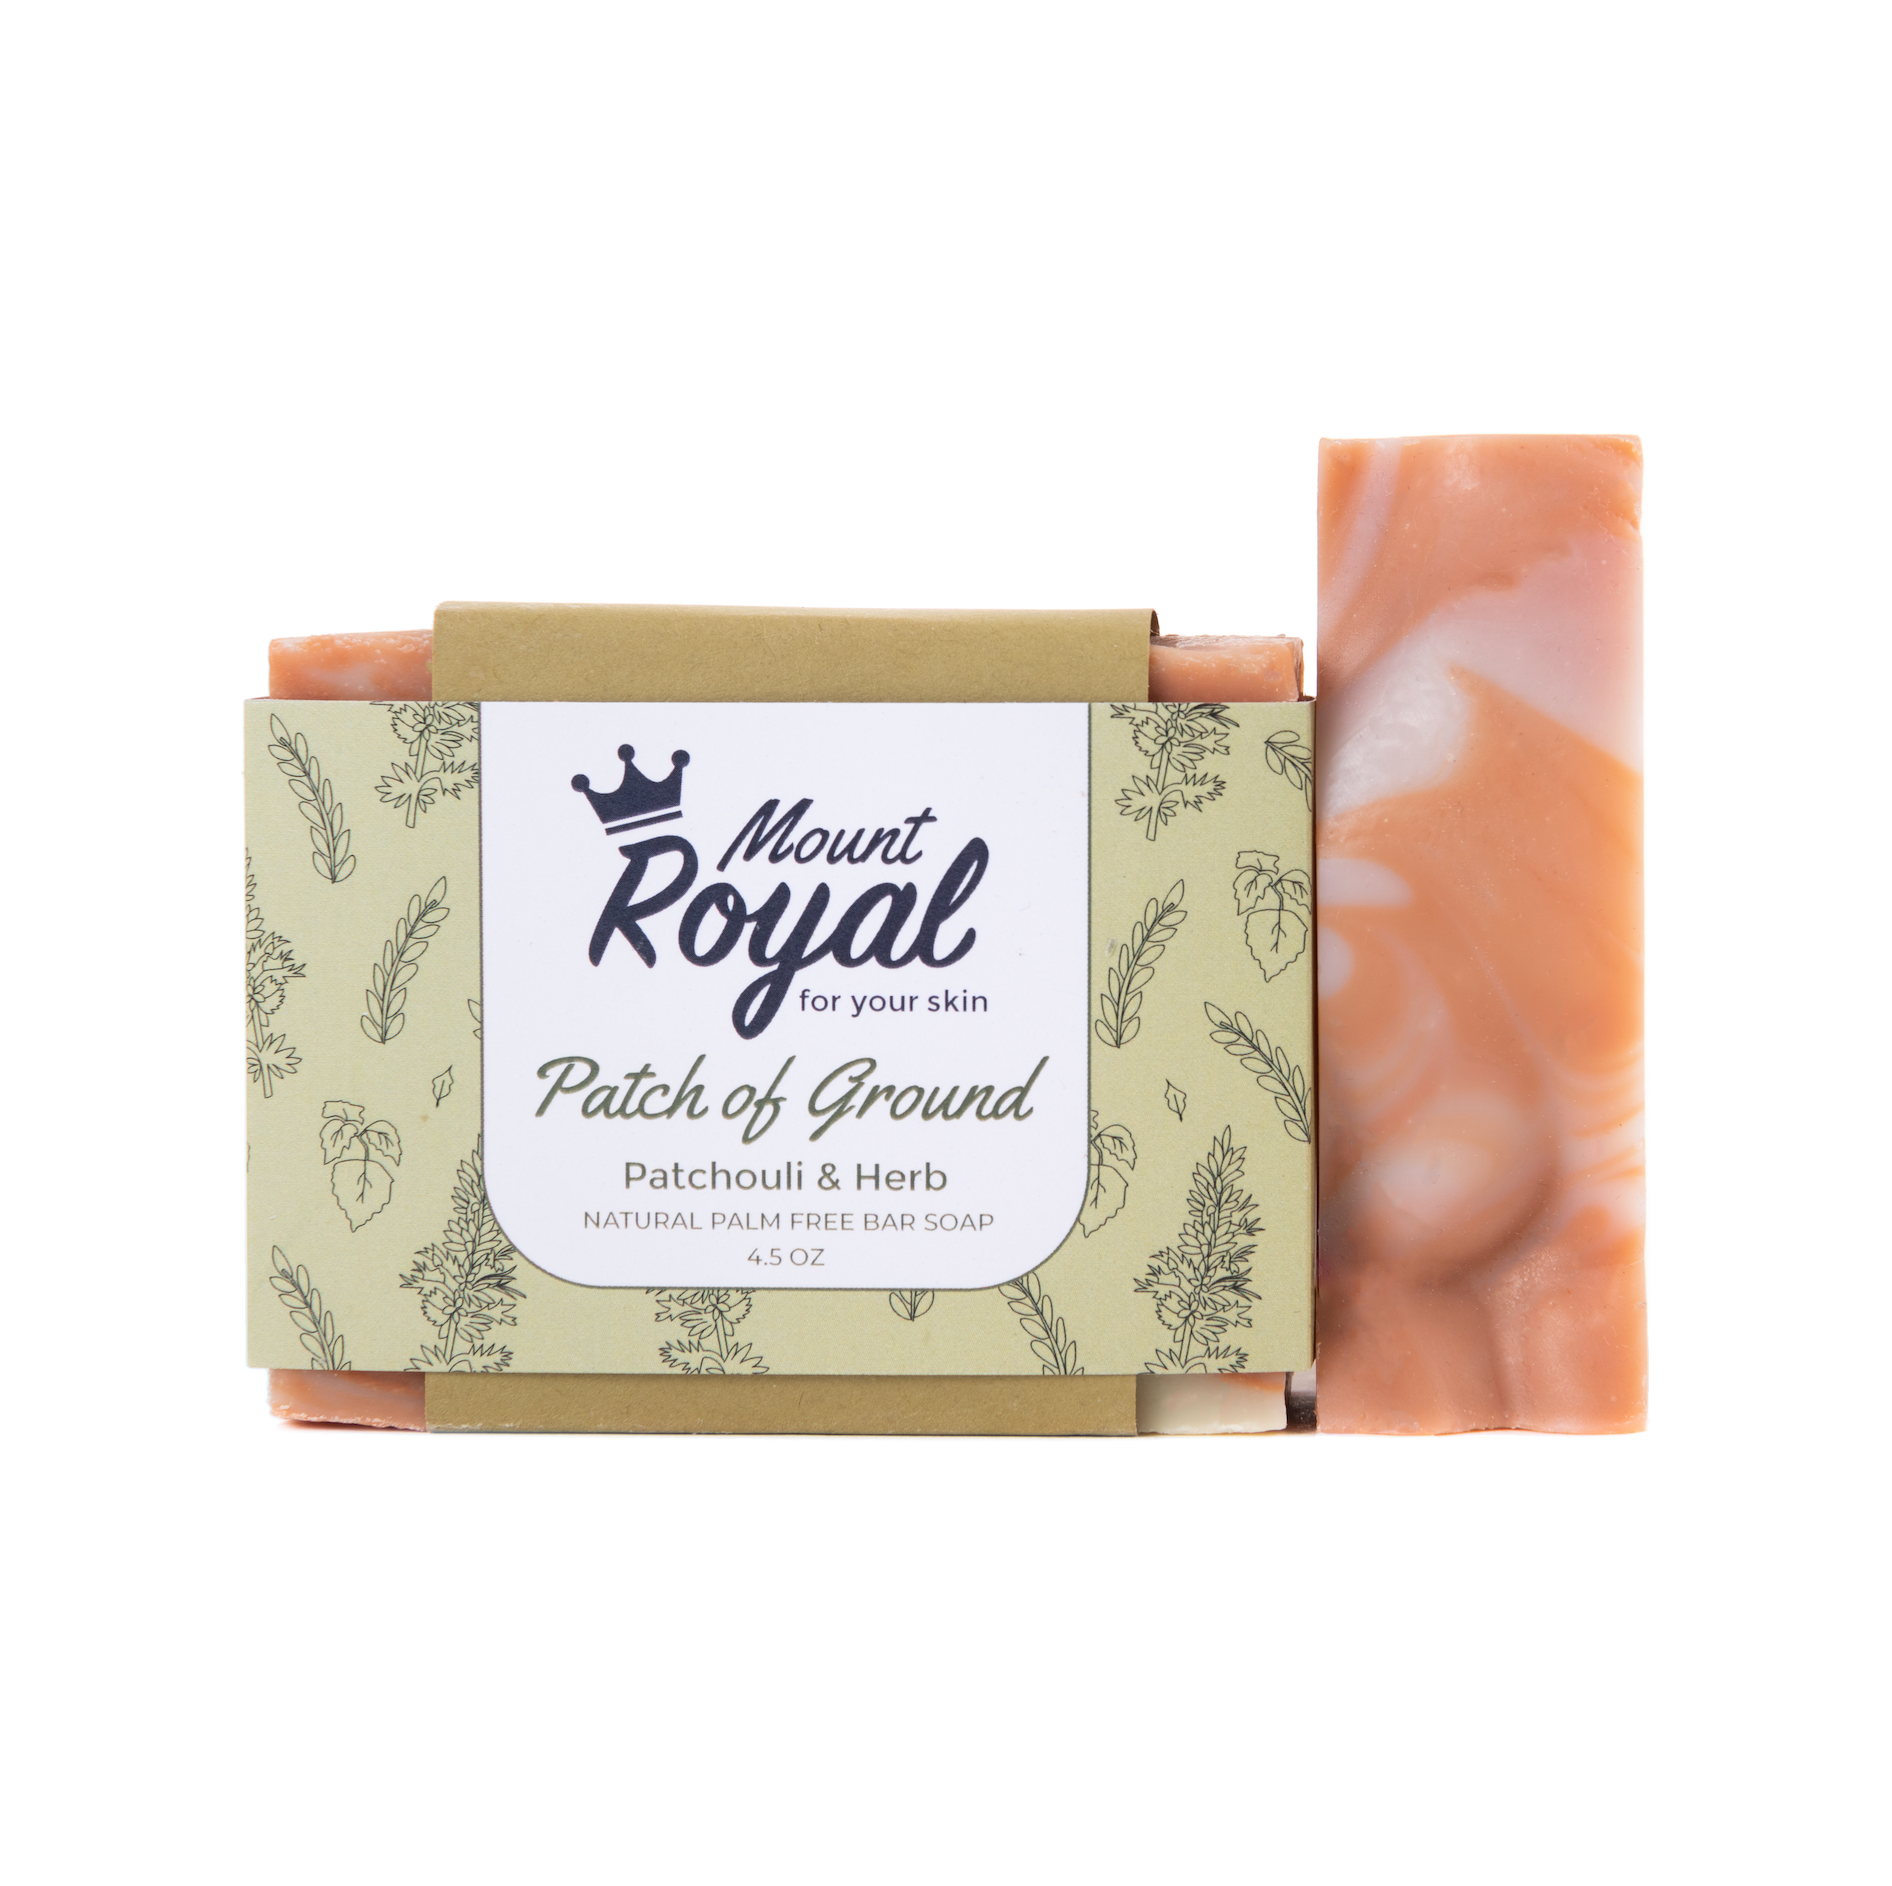 Organic Red Palm Oil Soap, Hydrating Bar Soap